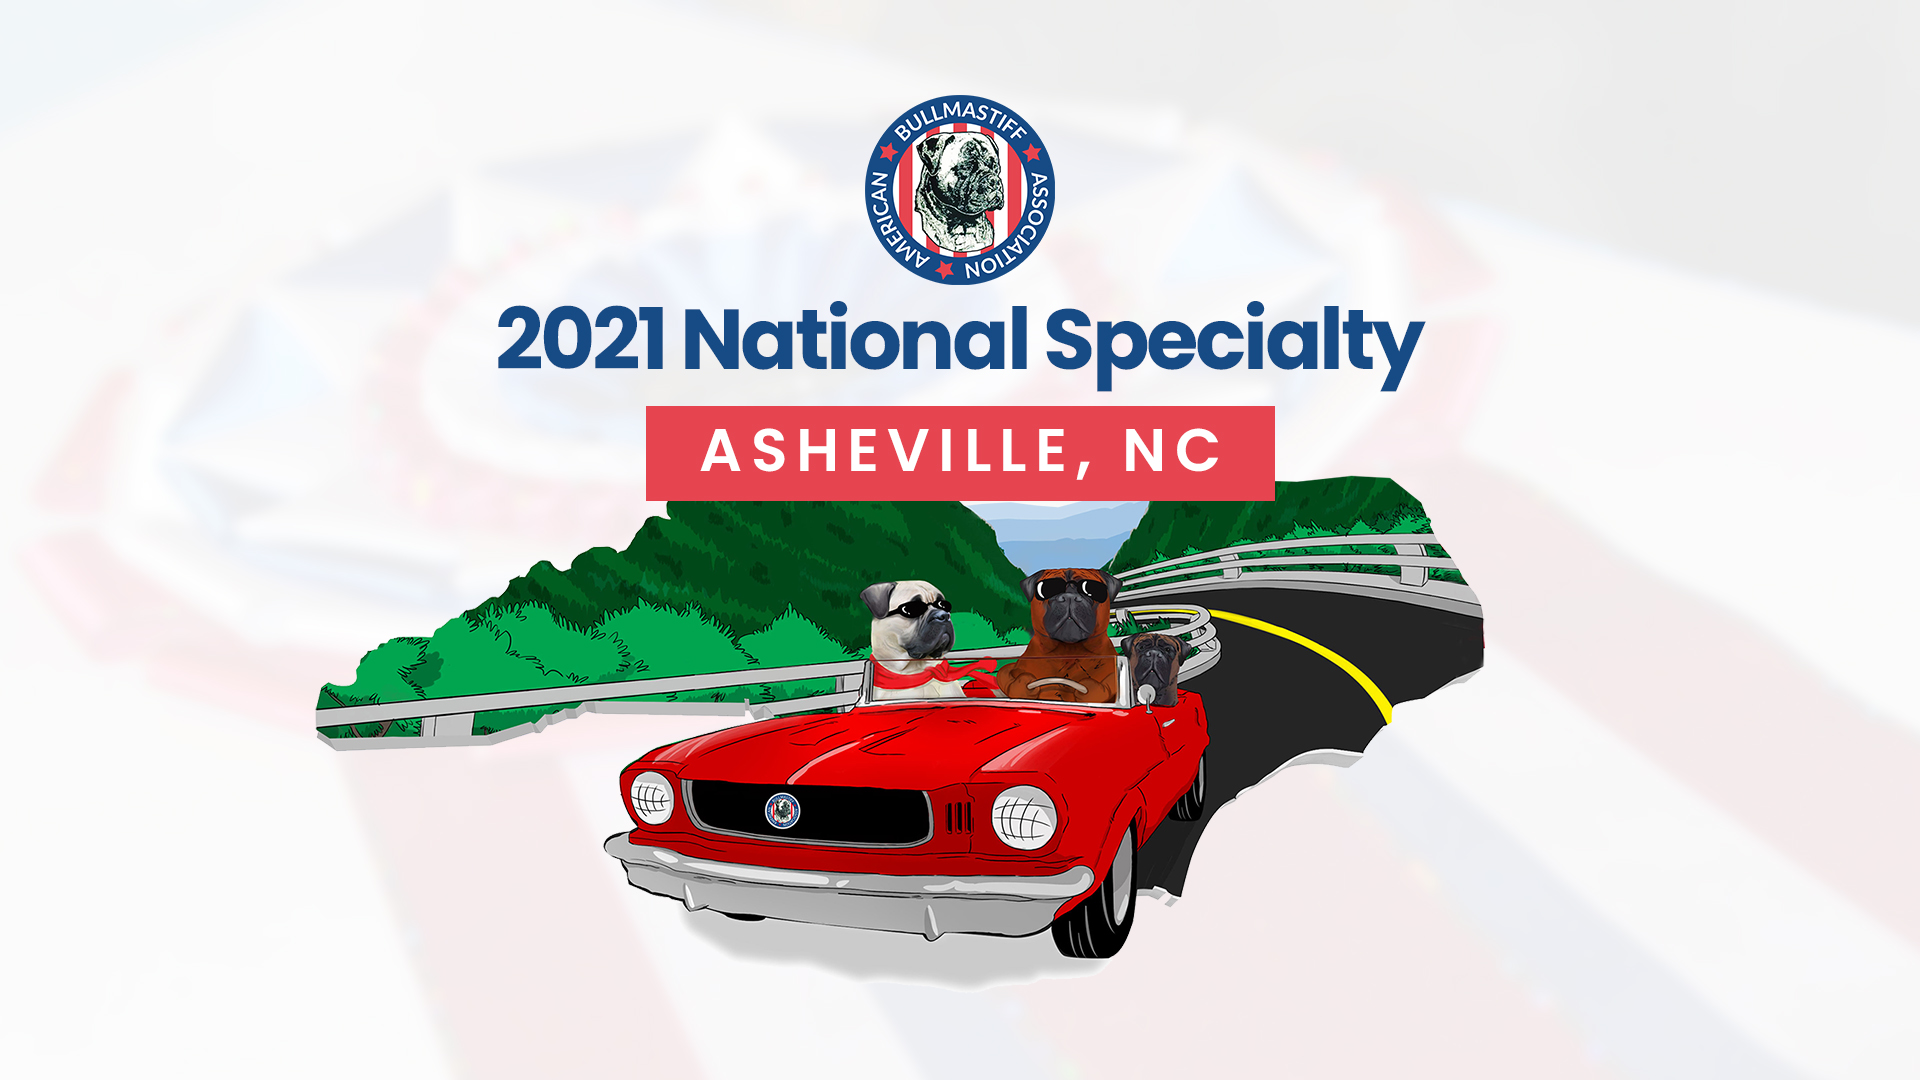 The National Specialty Event Image